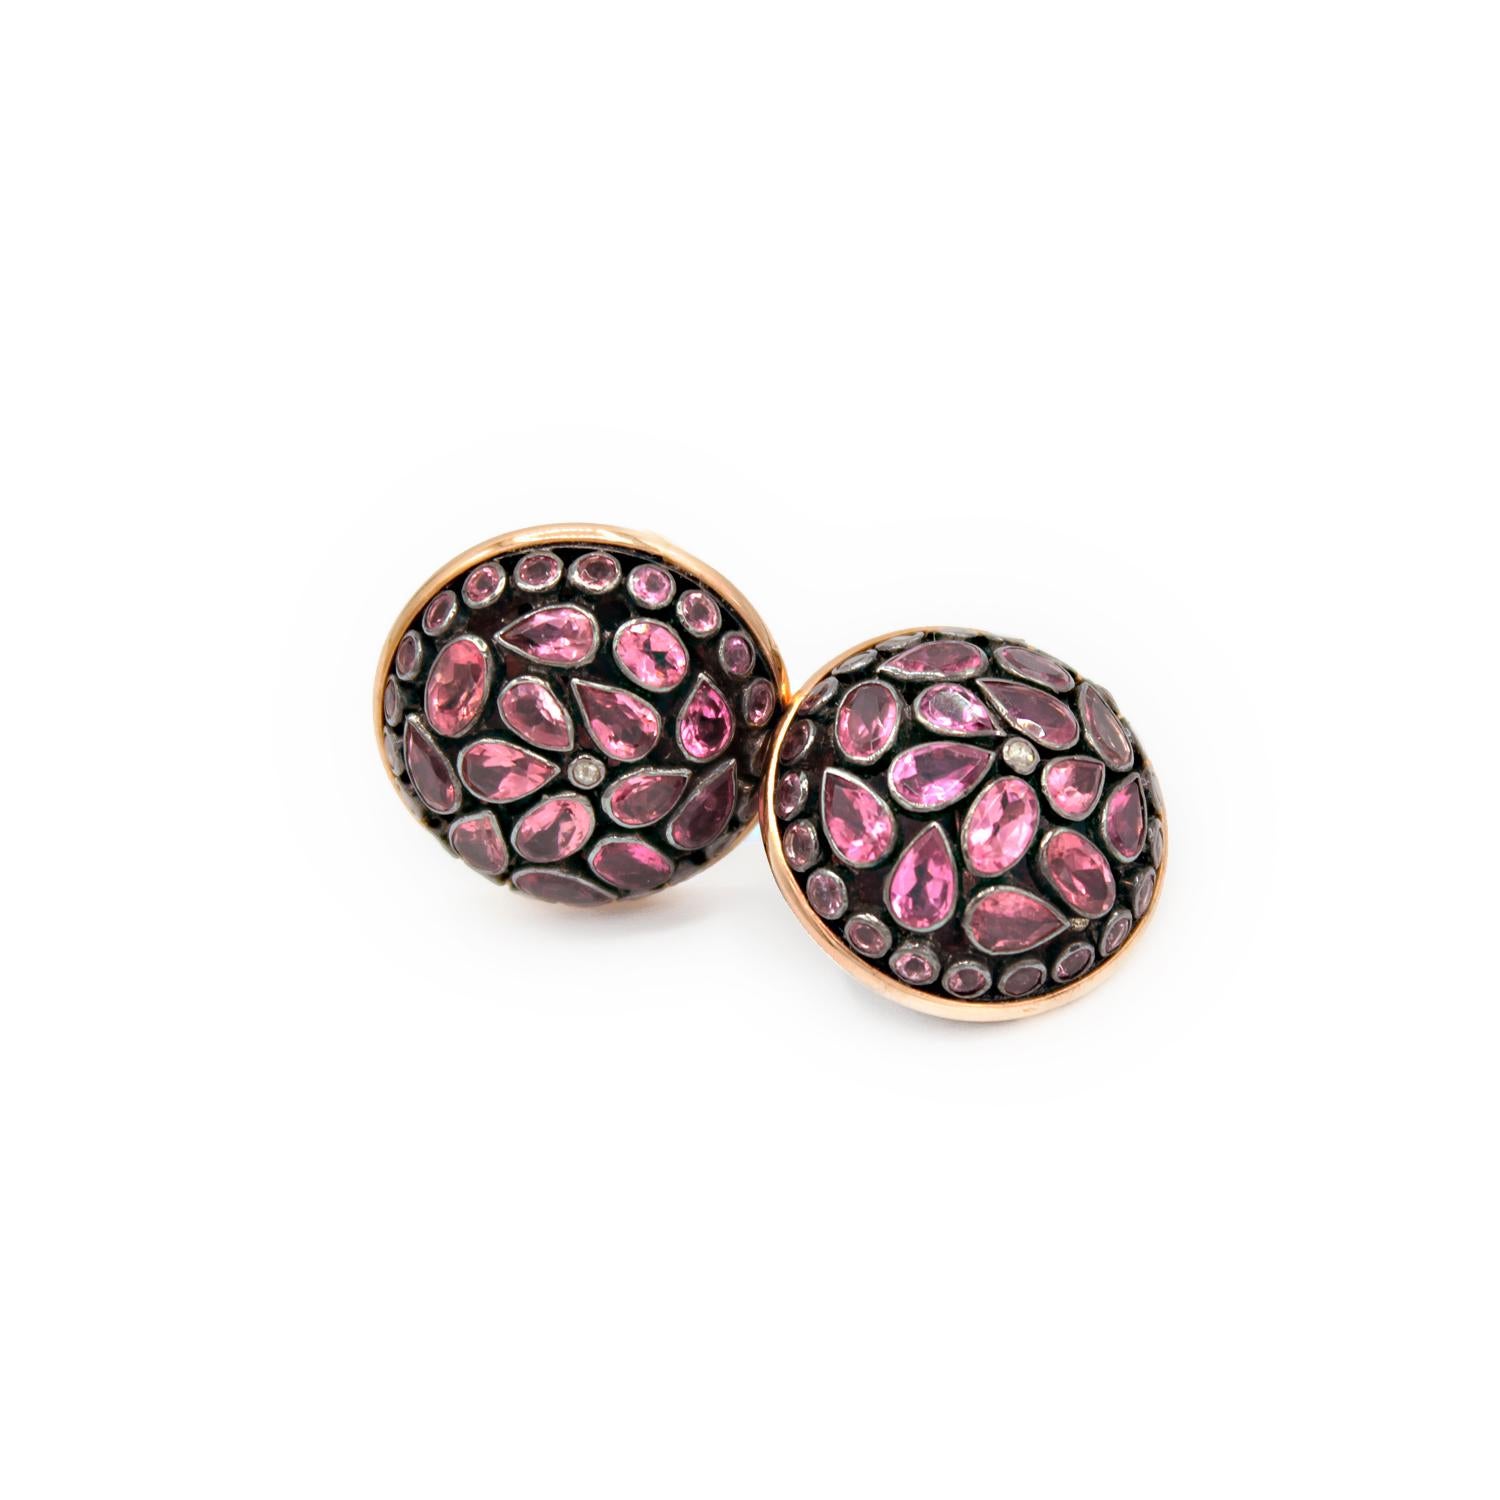 Elegant earrings in 18kt pink gold and pink tourmaline Junaghar cabochon. 
Silver setting
Pink tourmaline ct. 13,34
Pink Gold g. 4,3
Clip-on System

